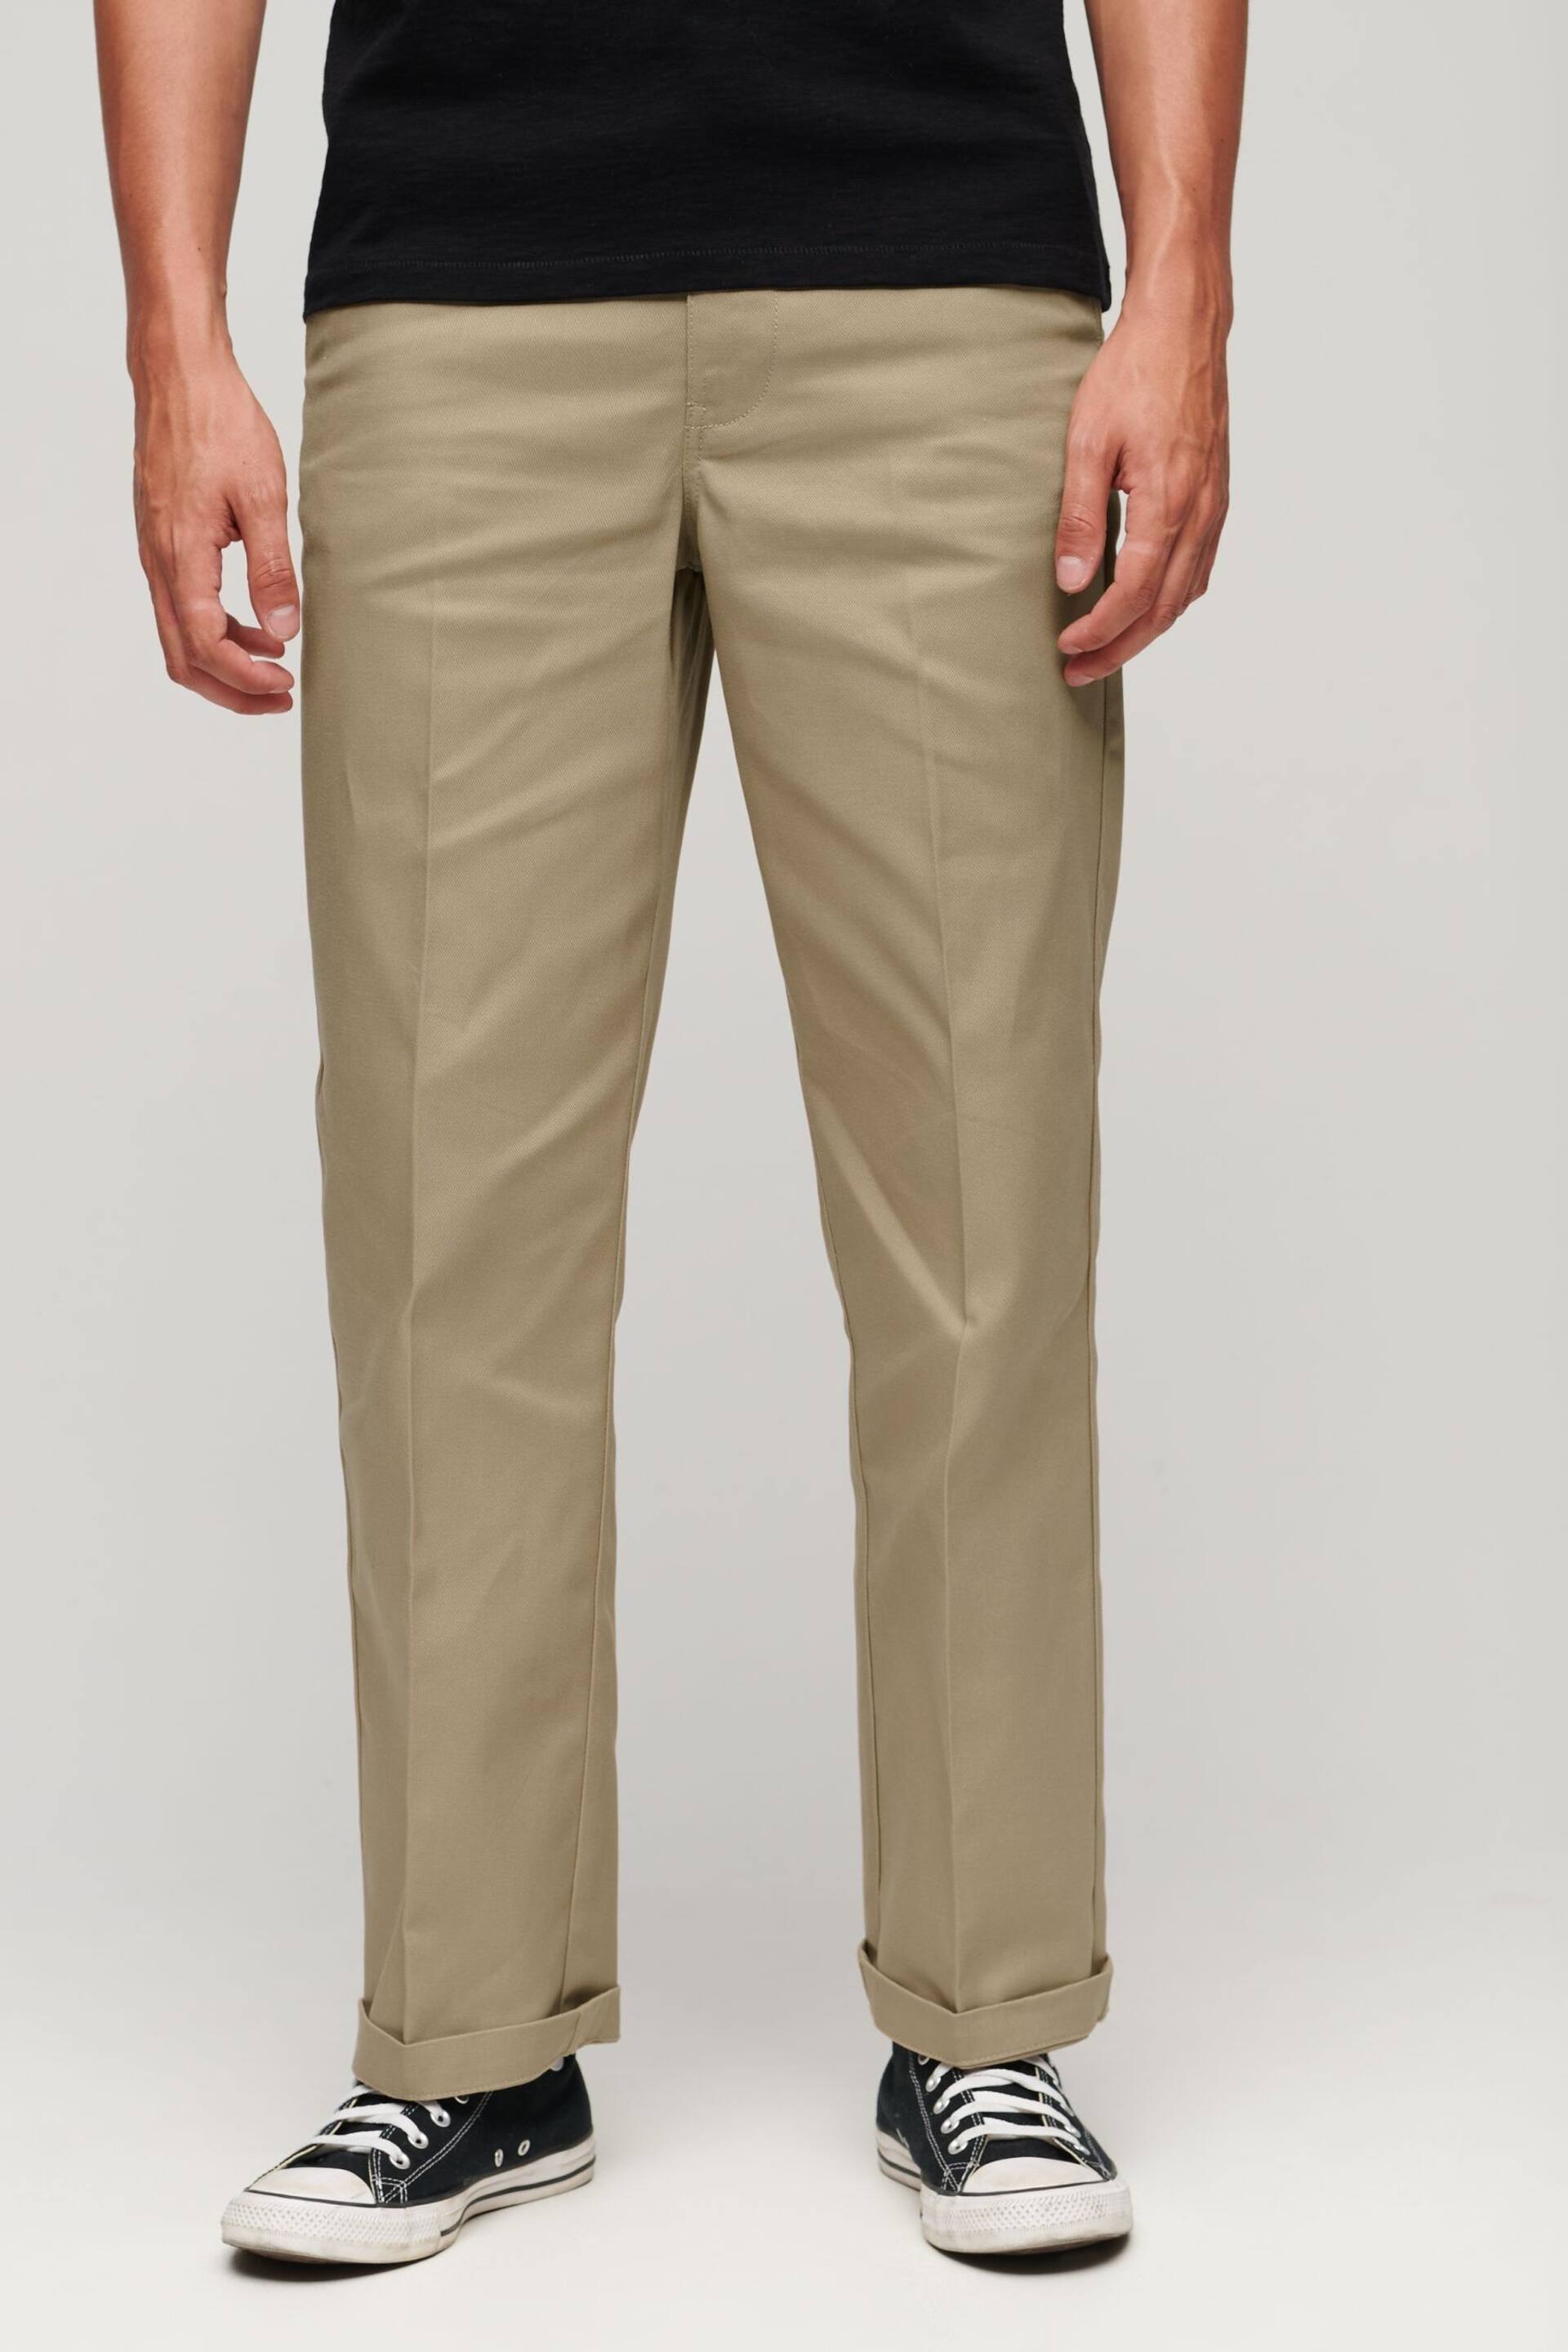 Superdry Brown Straight Chinos Trousers - Image 1 of 6